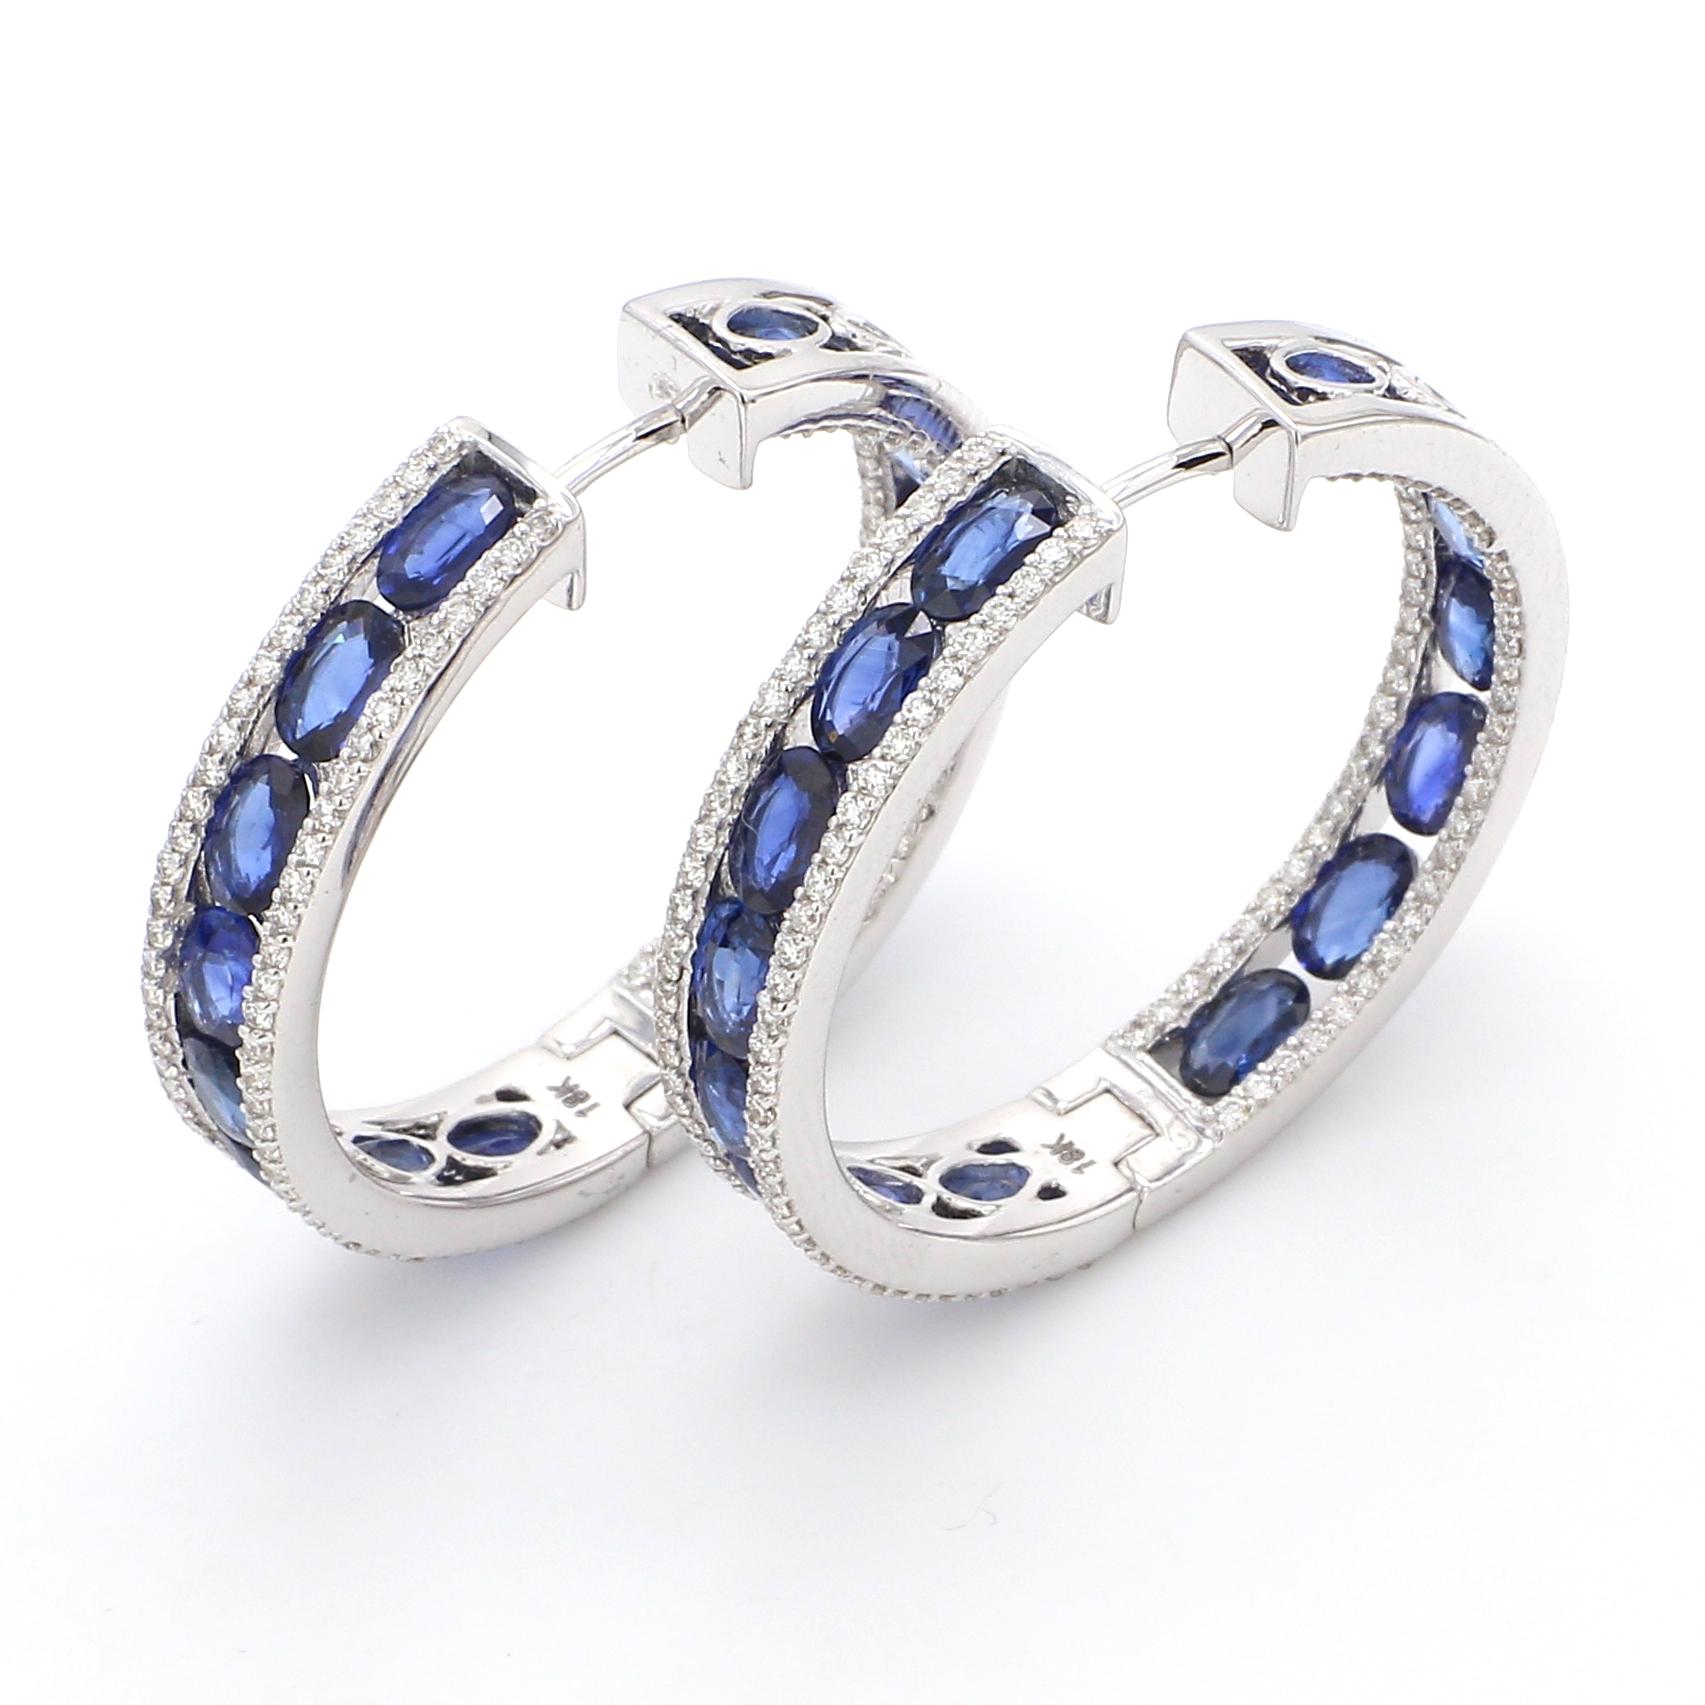 18 Karat White Gold 8.51 Carat Blue Sapphire and Diamond Hoop Earrings 

The modern ear drops (hoops) encircled all around with the azure blue oval sapphires incorporated within an equivalent layer of micro pave set diamonds on either side is